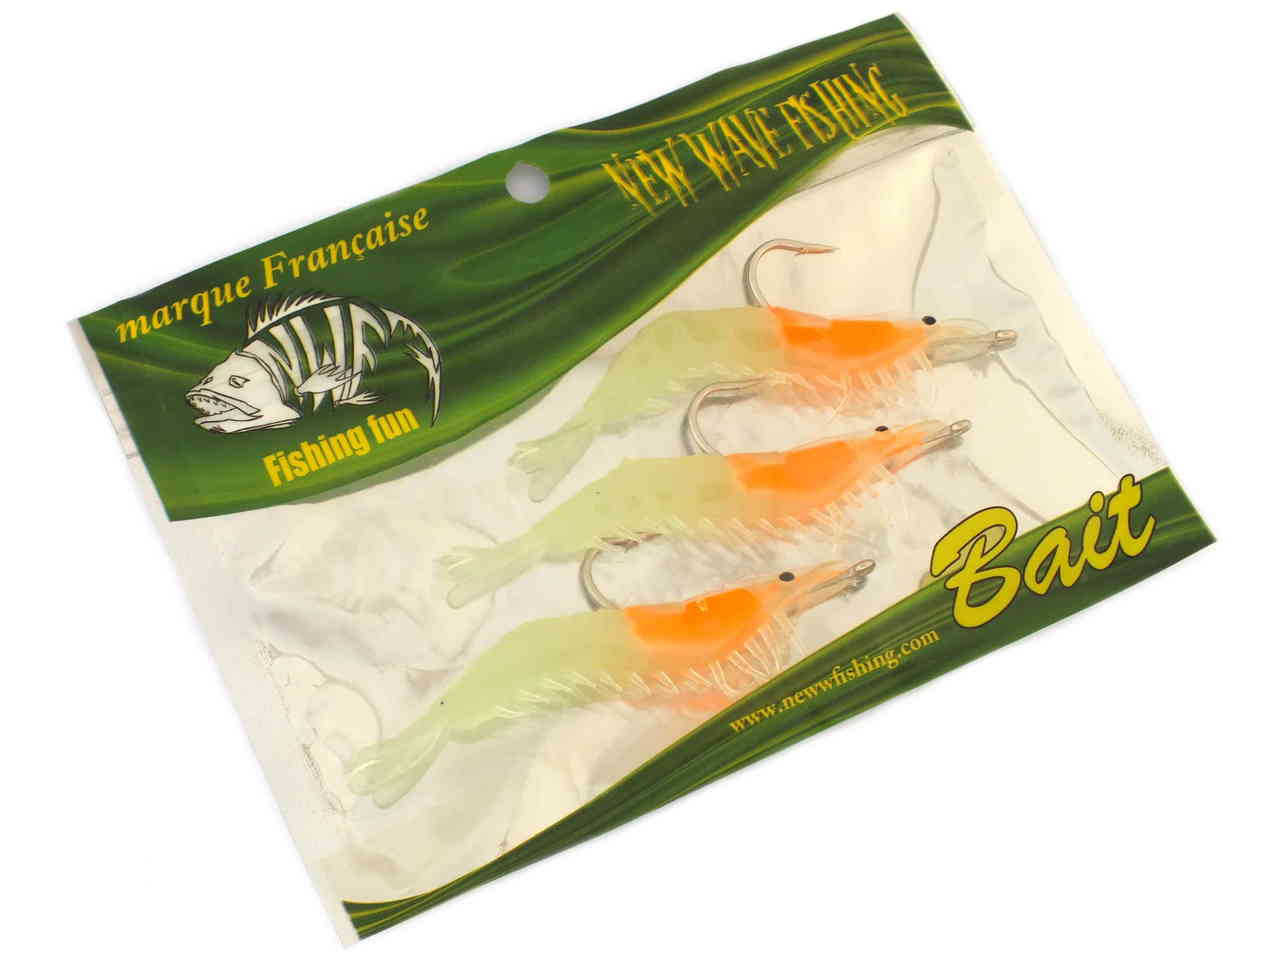 New Wave Soft Plastic Prawn Fishing Lures 3 X 3 Pack Glow In The Dark -  Wholesale Fishing Supplies